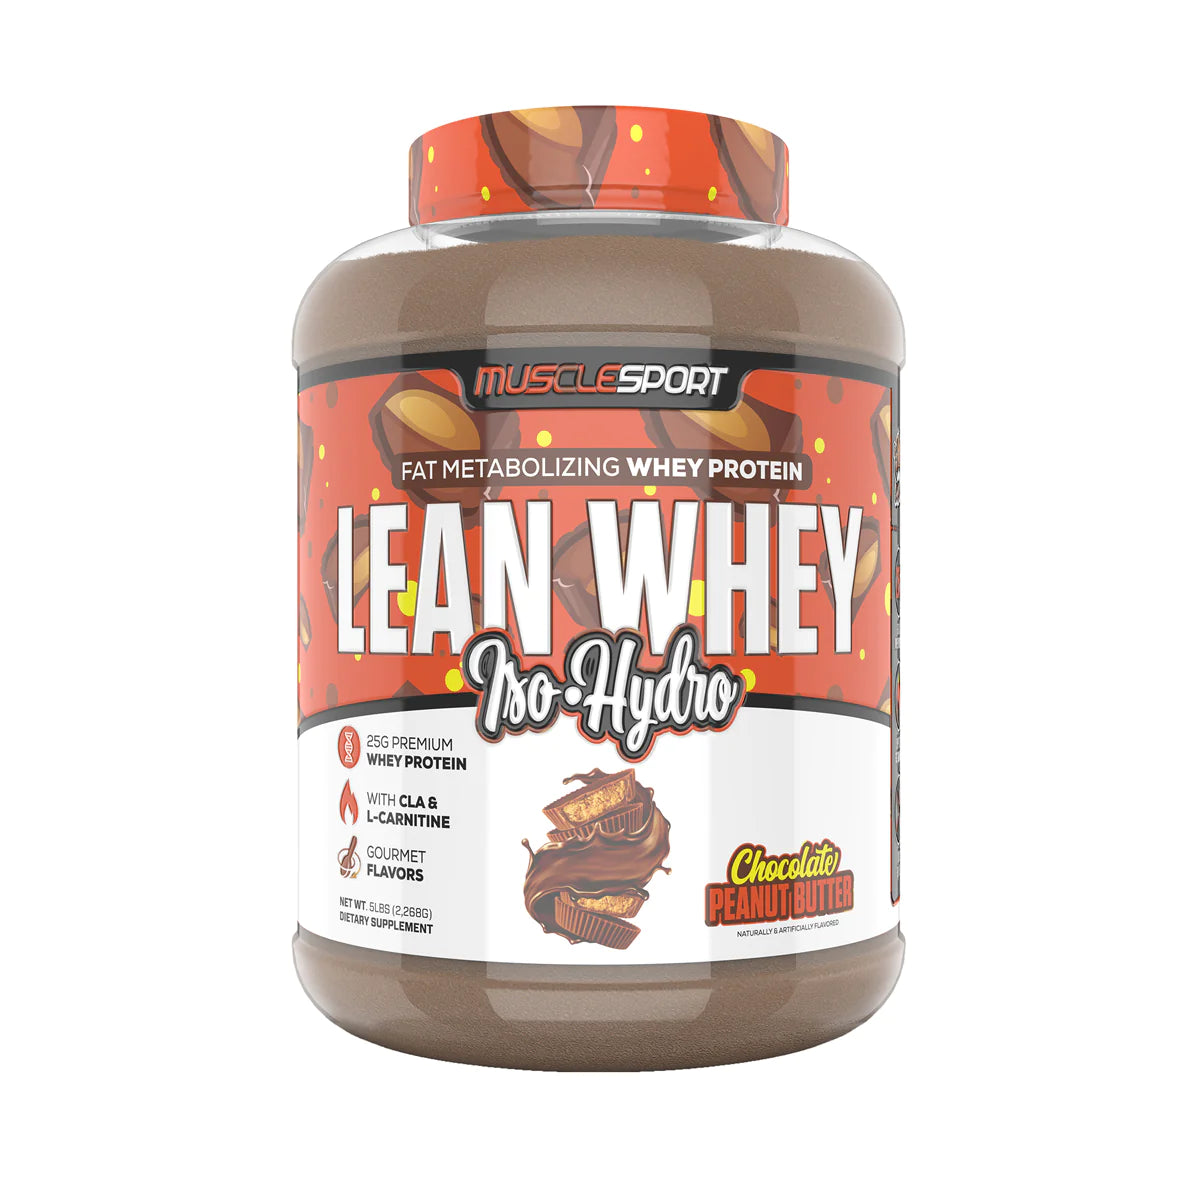 Muscle Sport Lean Whey Iso-Hydro 5lbs (Chocolate Peanut Butter)